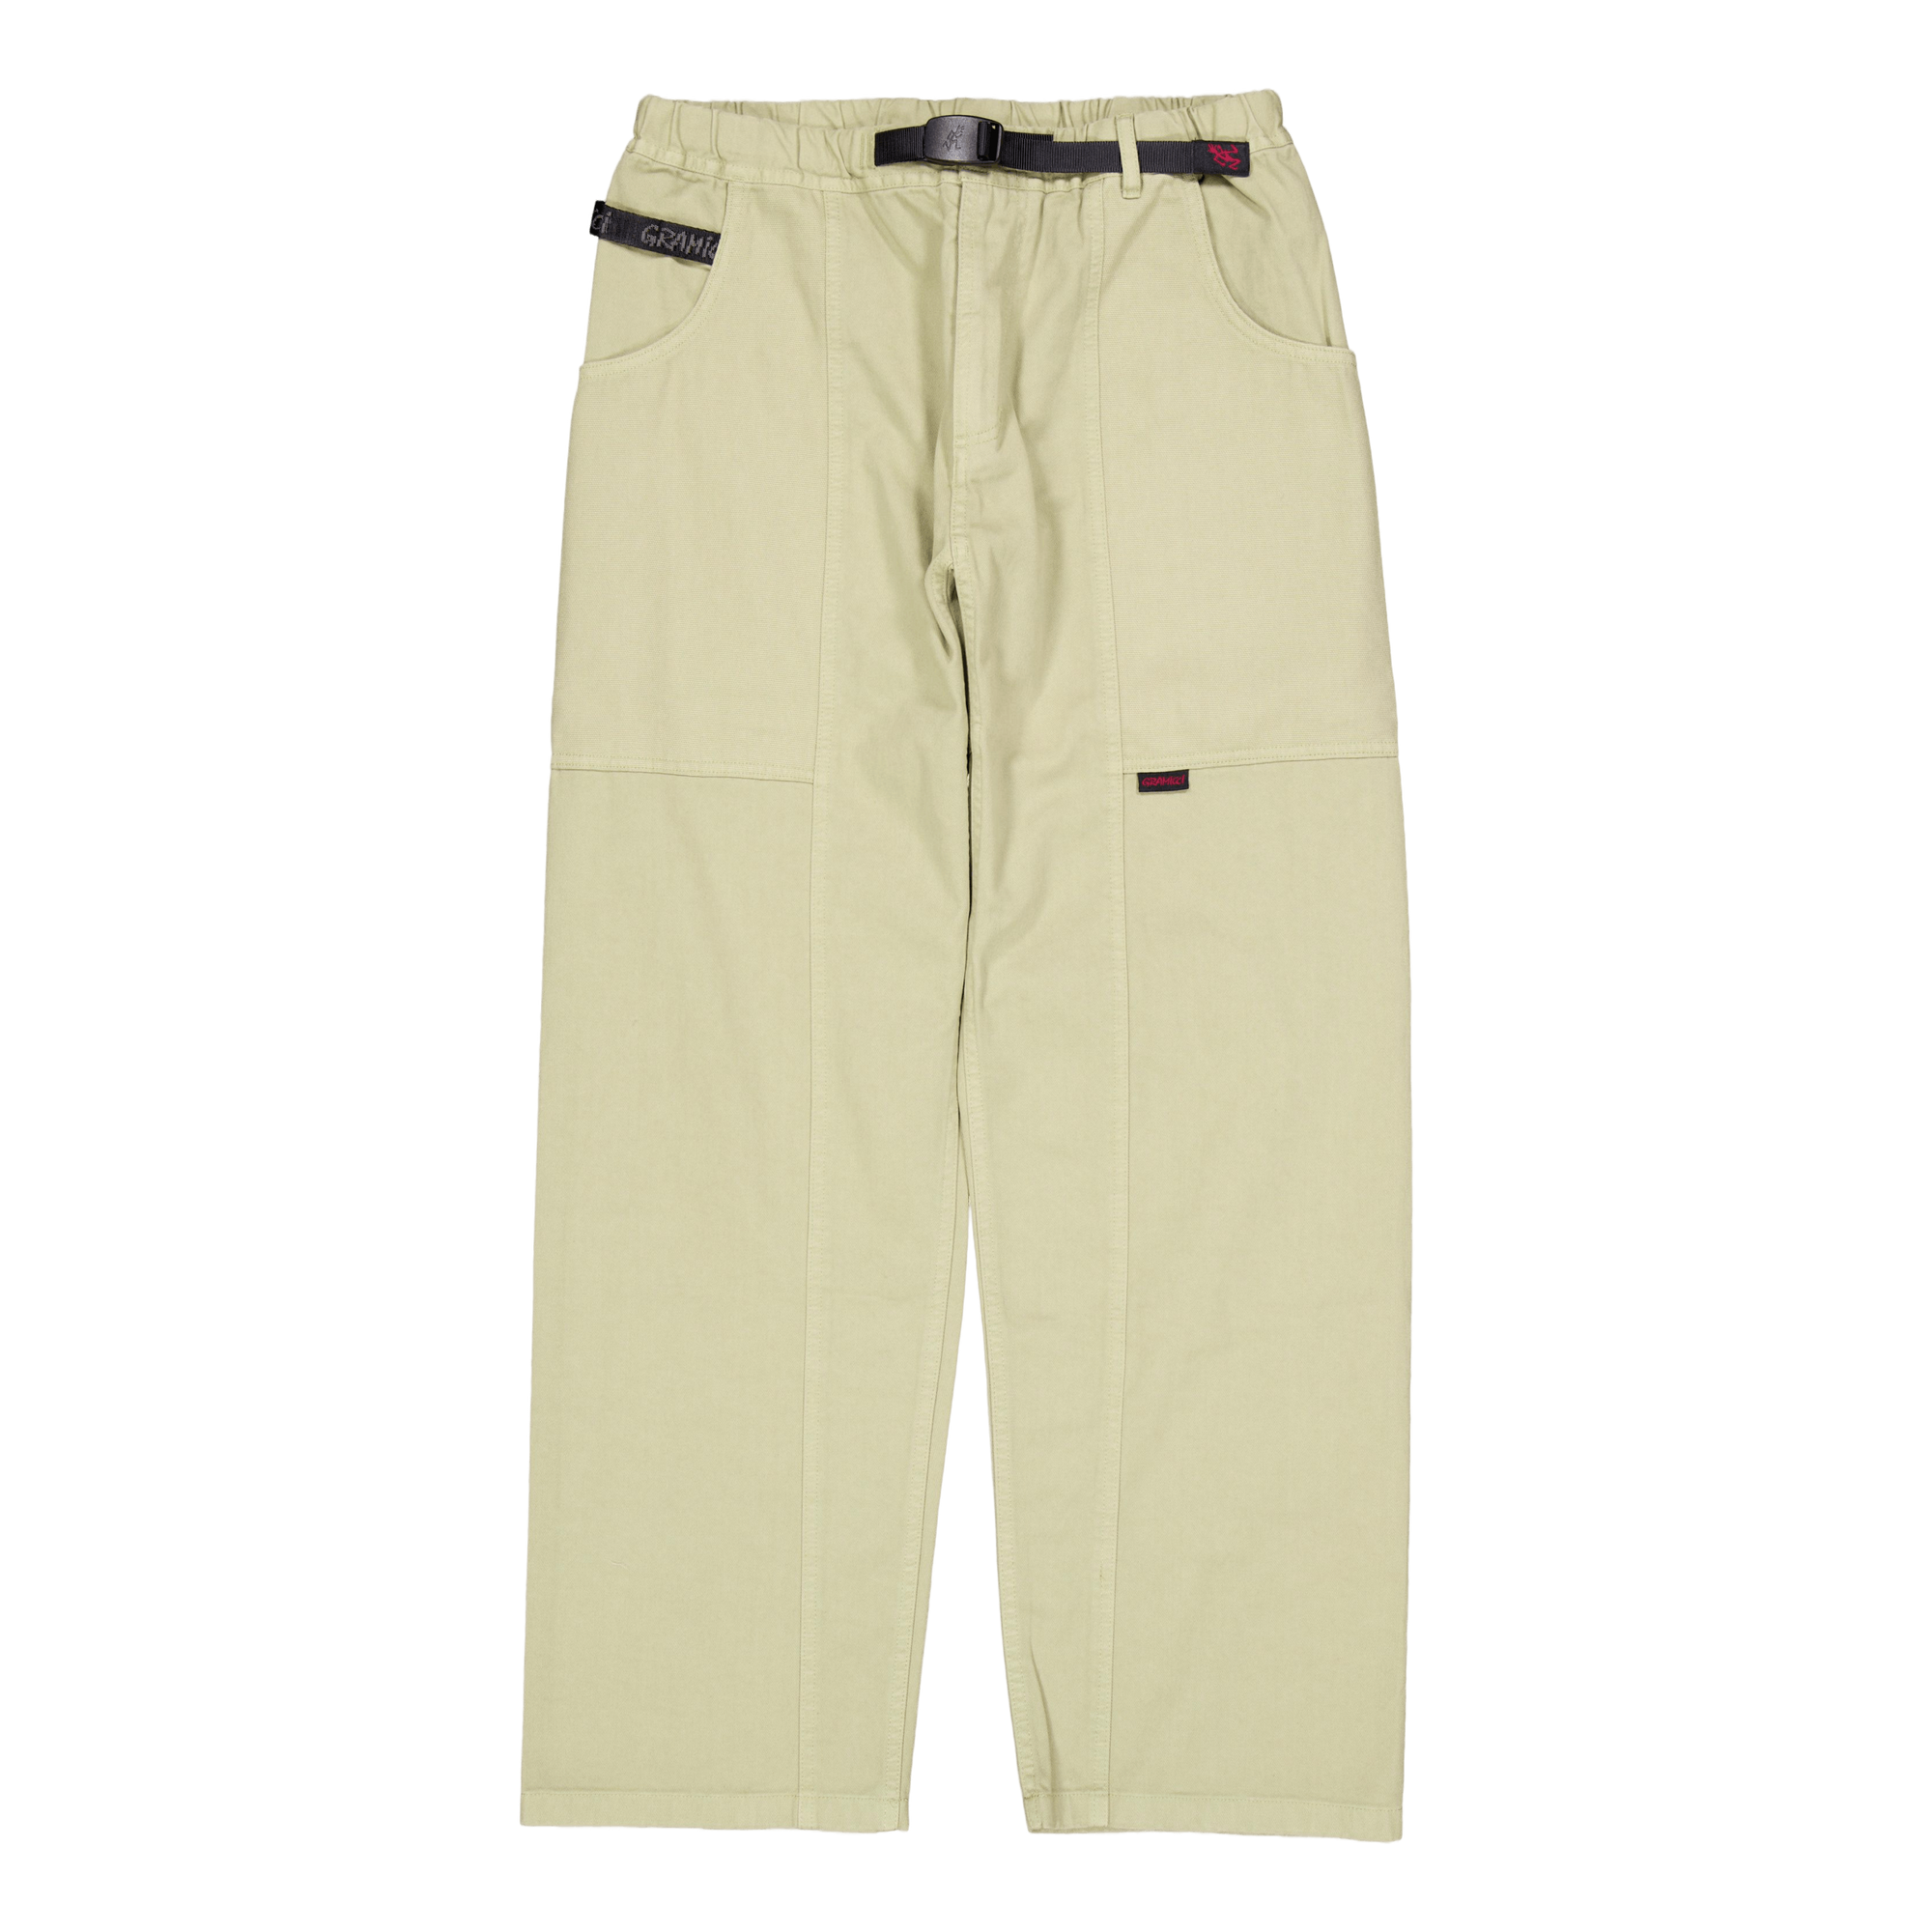 Gadget Pant Faded Olive